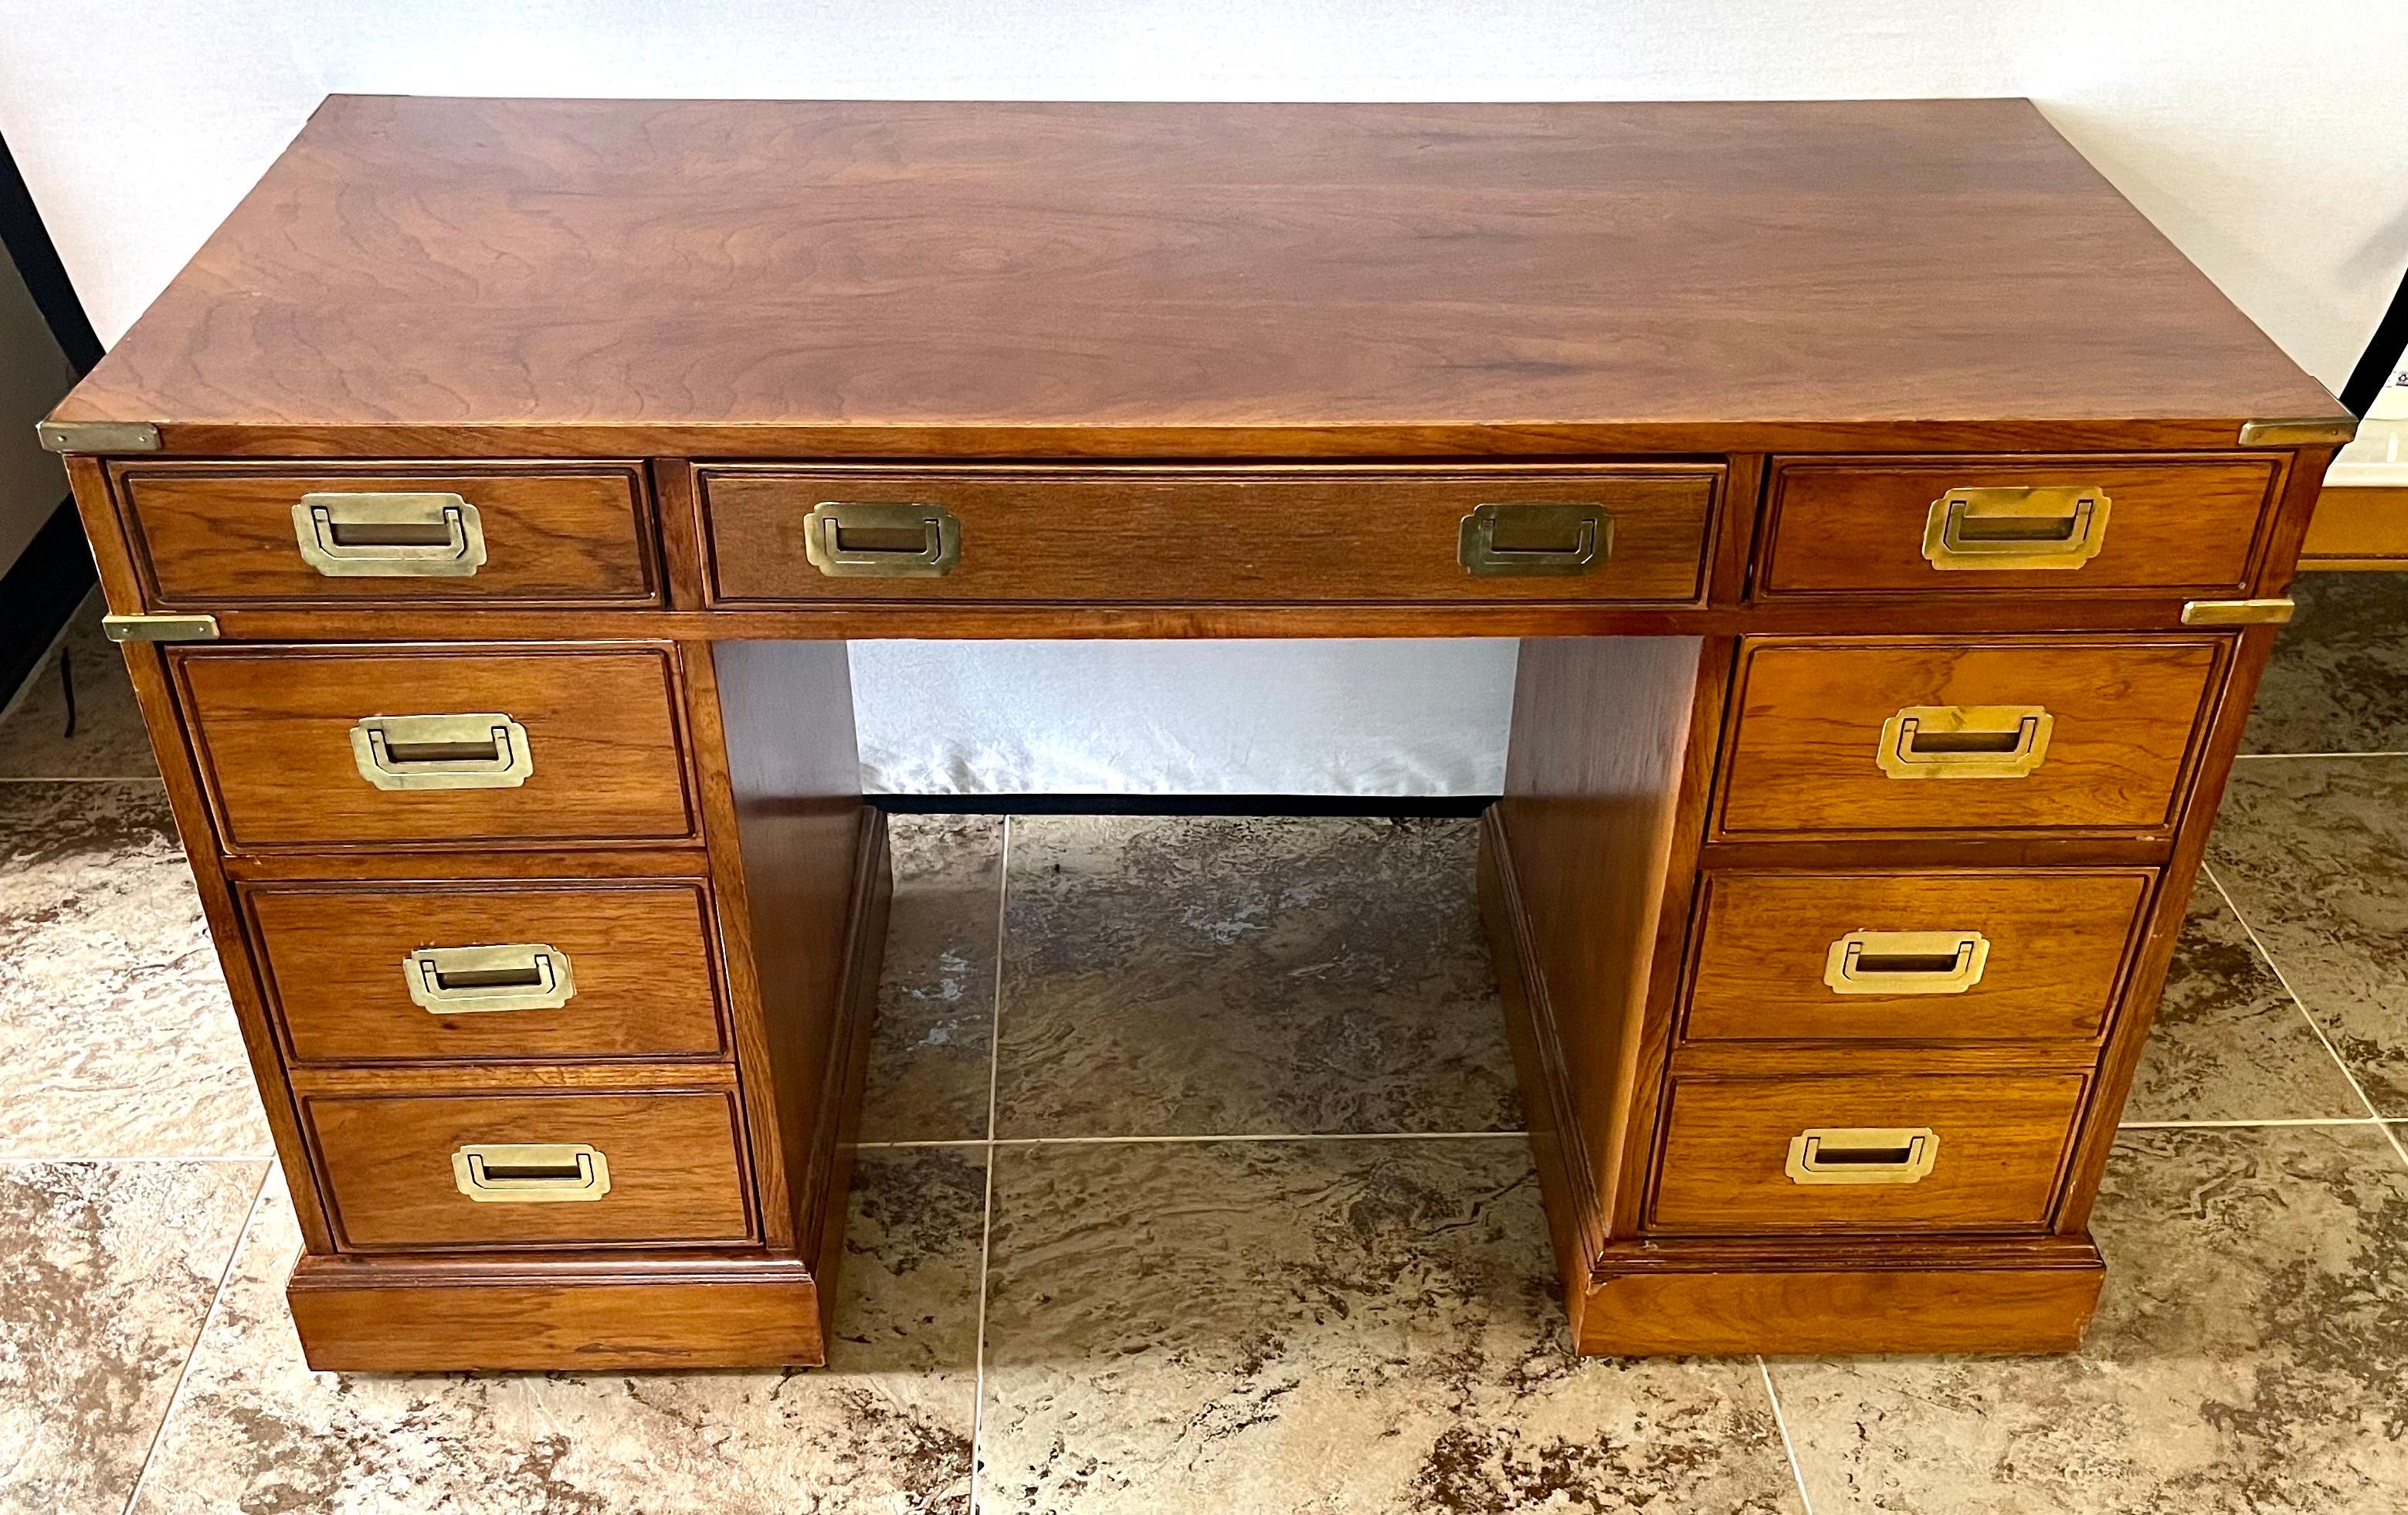 Handsome mahogany kneehole campaign partners desk with brass corner brackets and recessed brass drawer pools. With nine dovetailed drawers for with plenty of storage. Finished on the back it can also float in a room. By National Mt. Airy. A